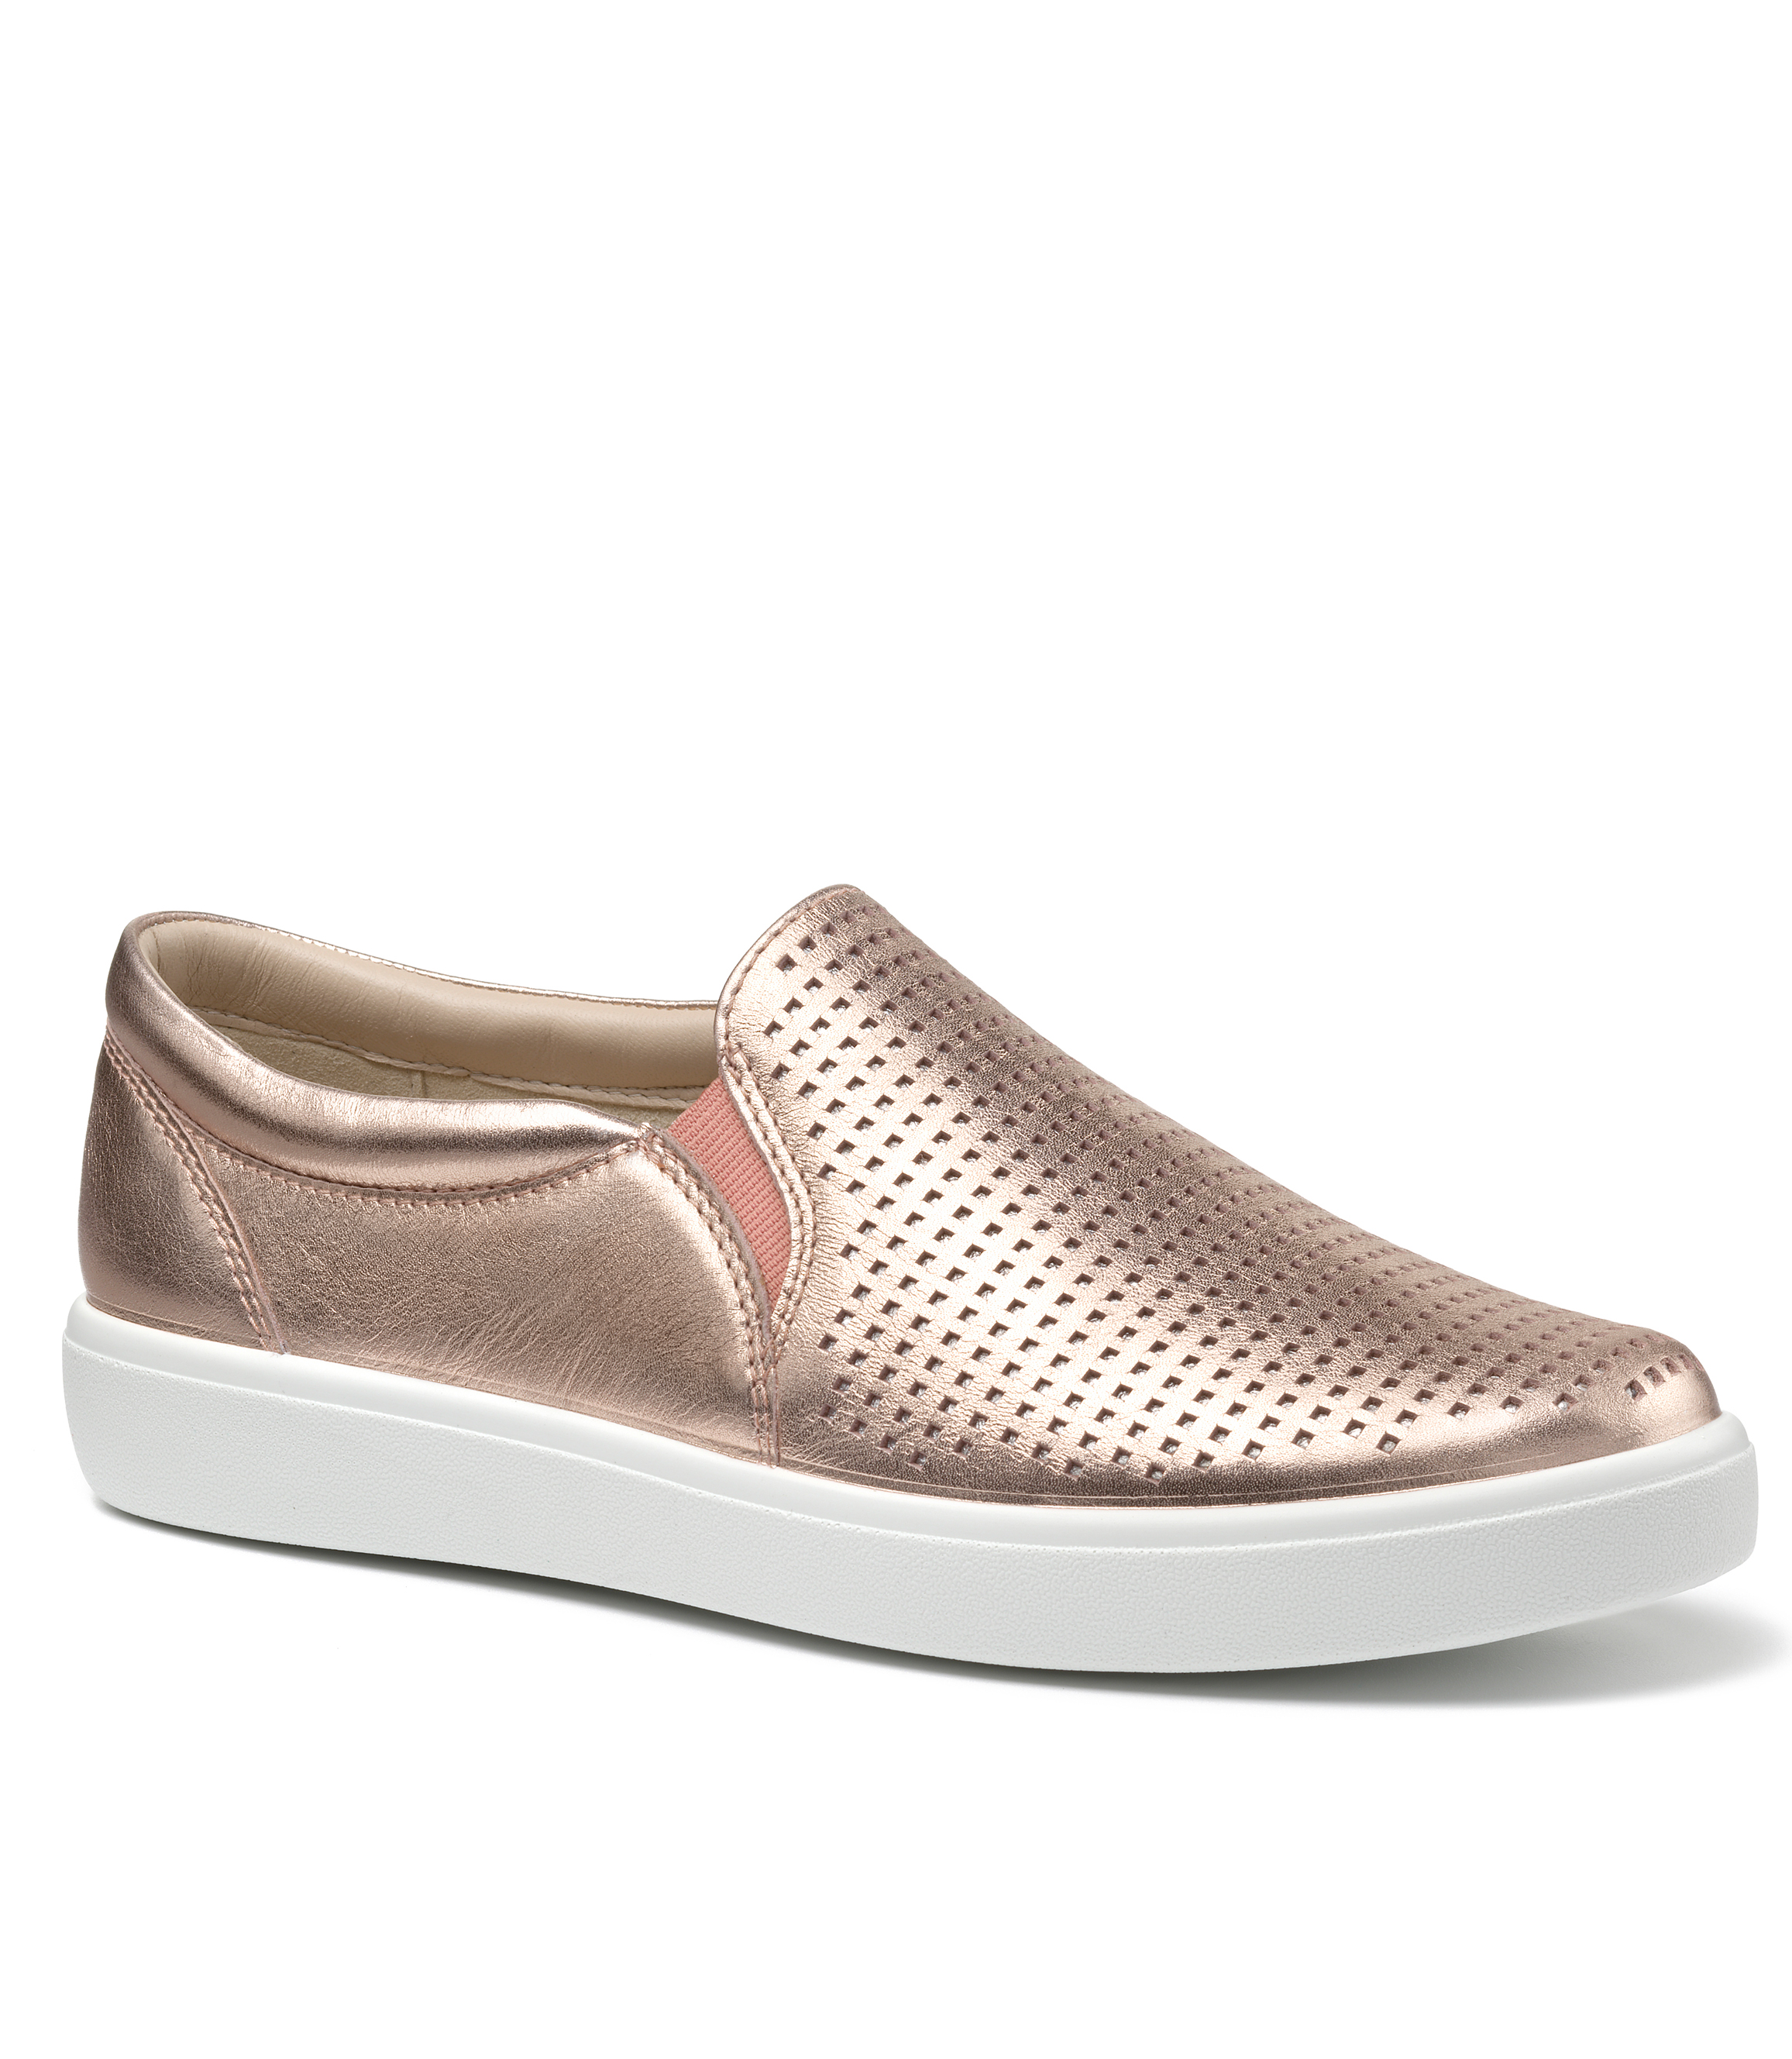 HOTTER ROSE GOLD LEATHER DAISY SHOE | Rosella - Style inspired by elegance